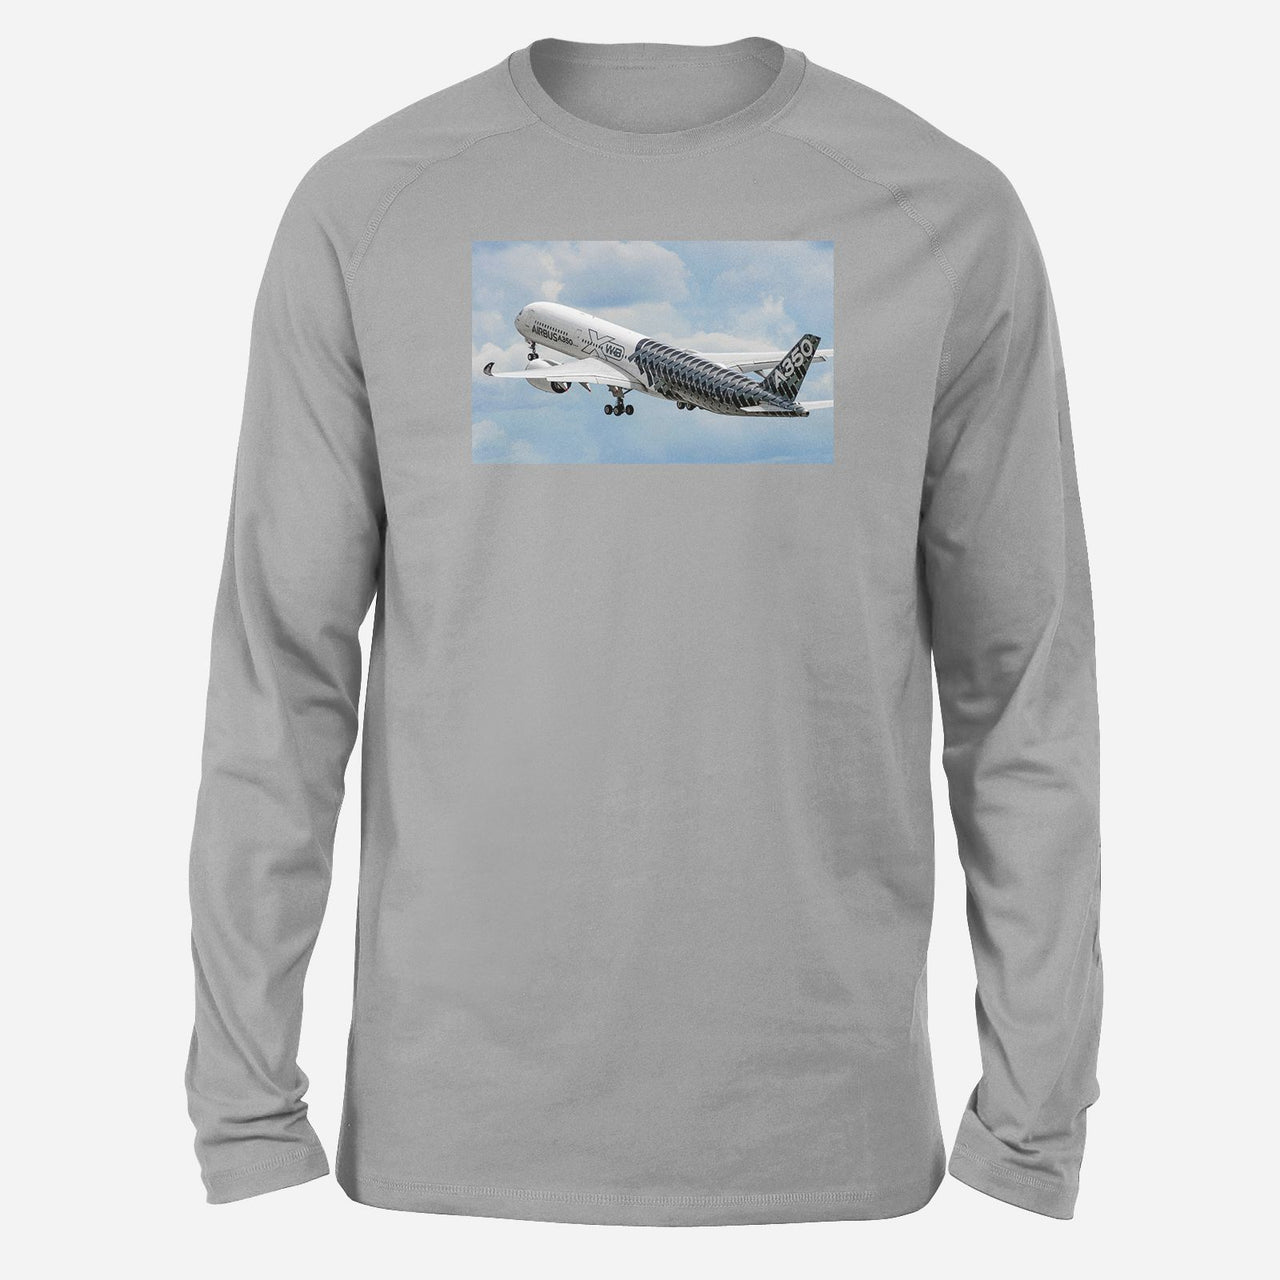 Departing Airbus A350 (Original Livery) Designed Long-Sleeve T-Shirts